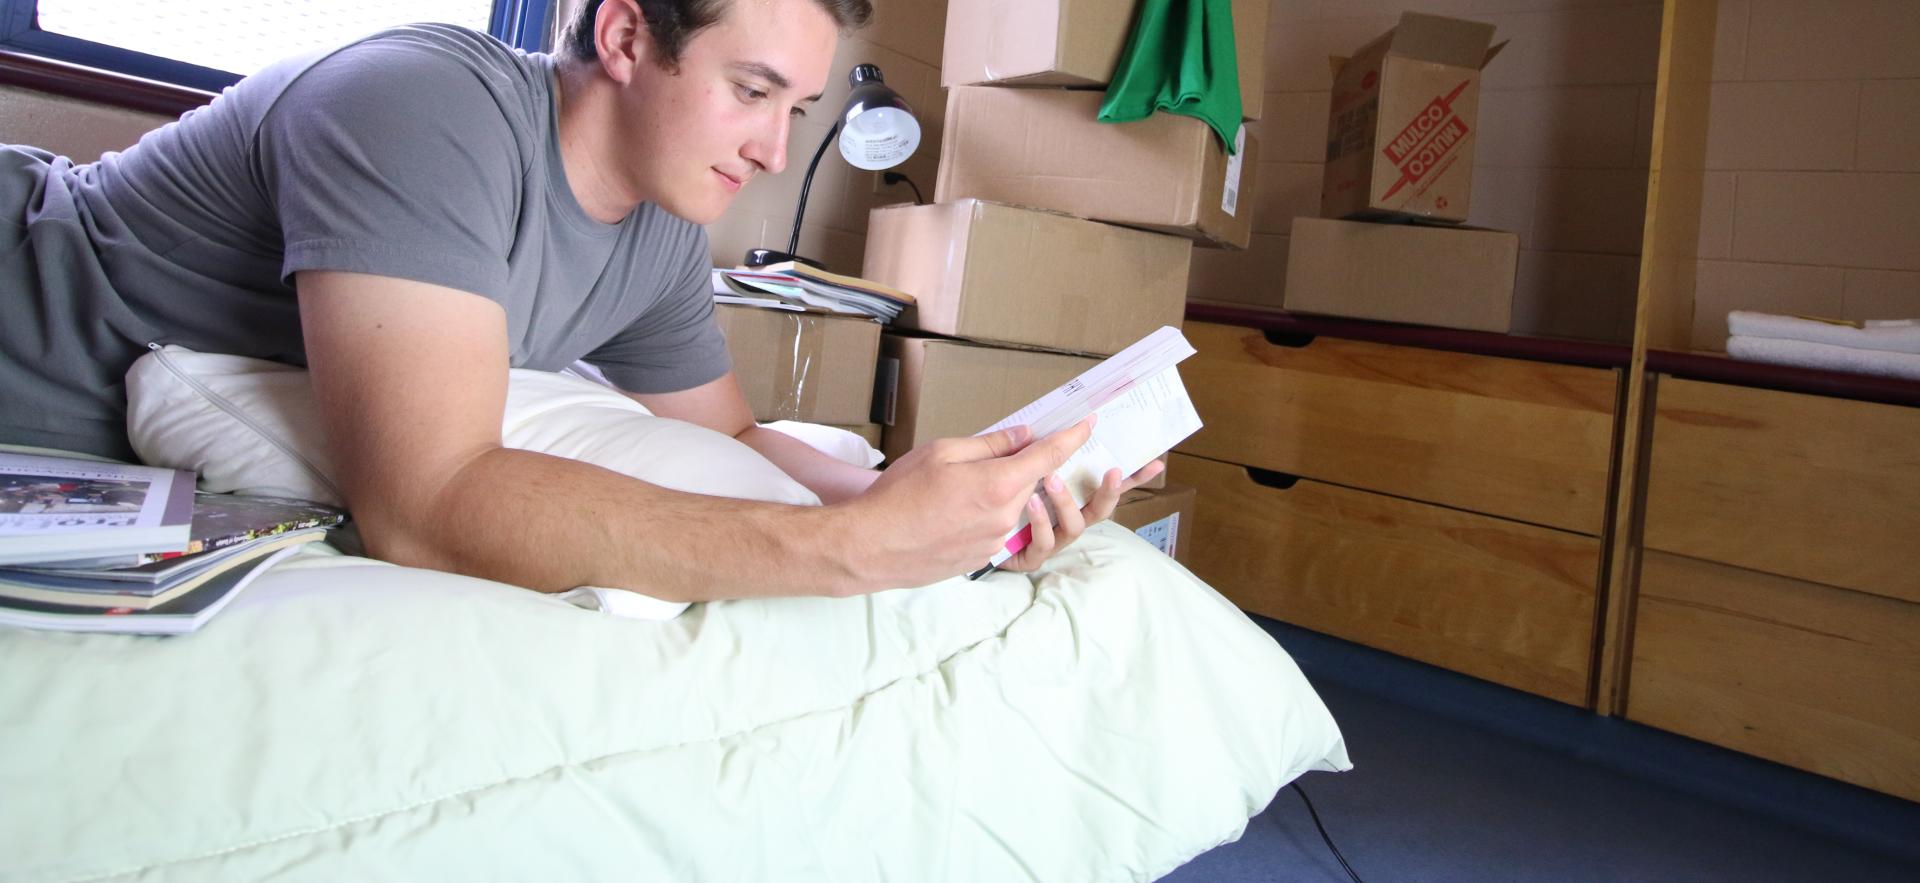 Student laying in bed reading book